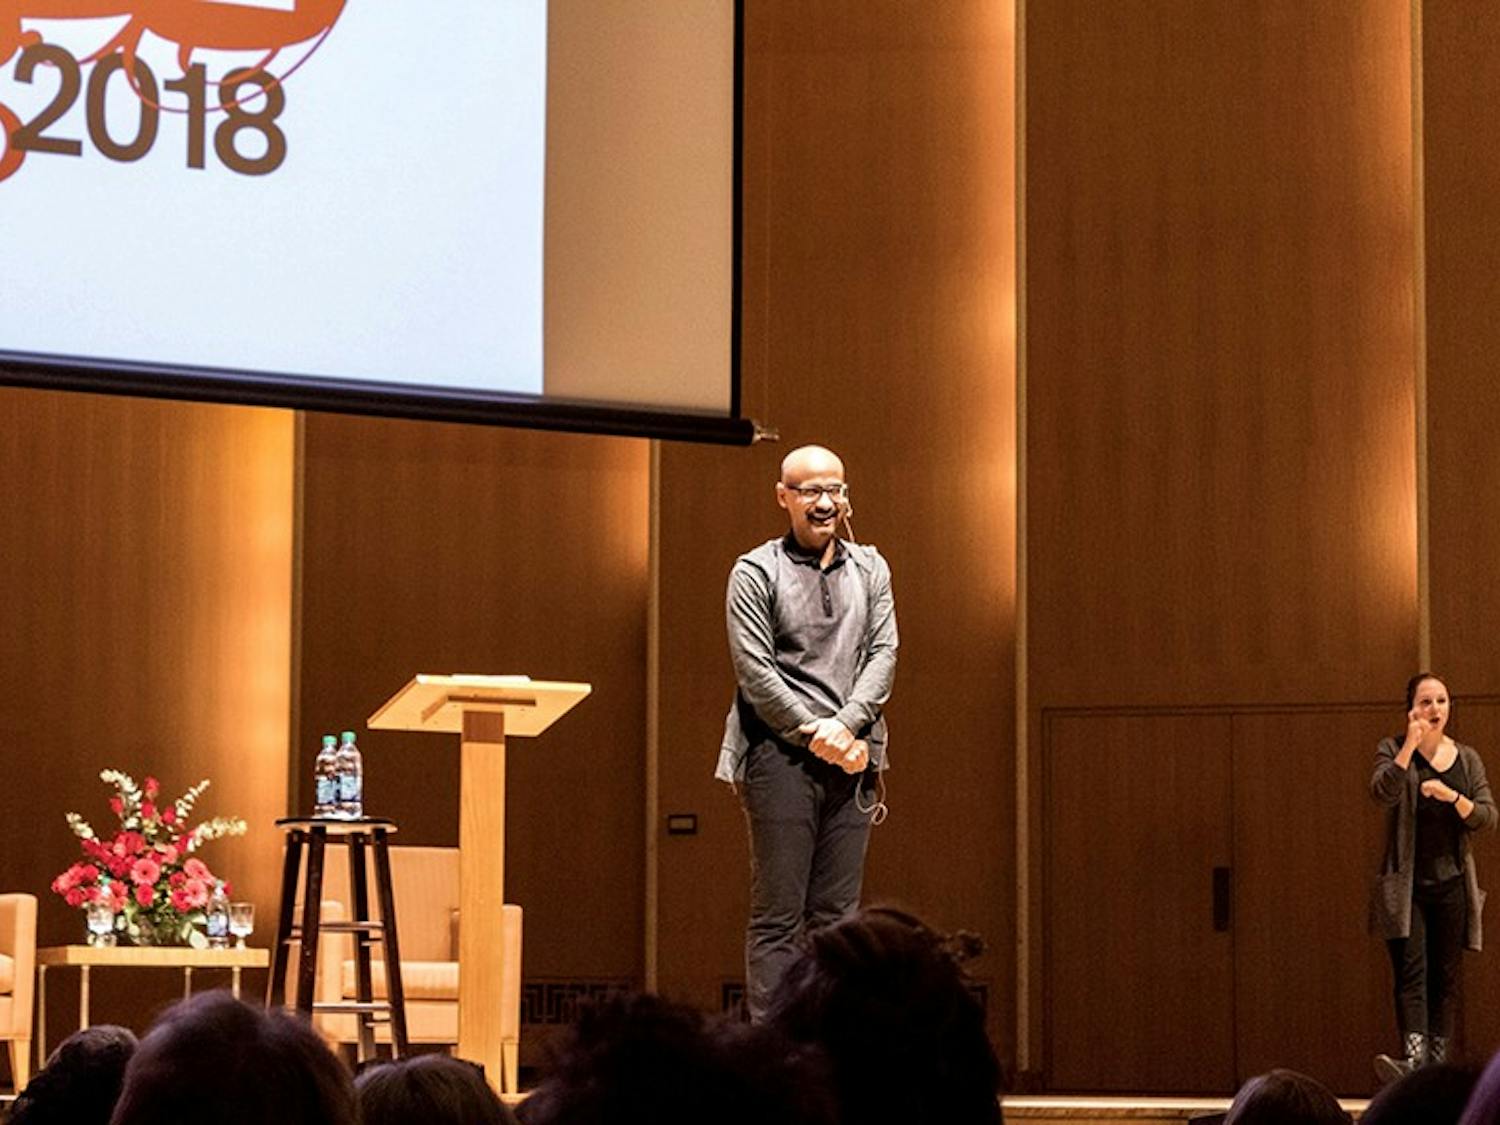 Junot Díaz spoke to a sold out crowd on Friday night about the feelings of immigrants and what it’s like to be an immigrant writer.